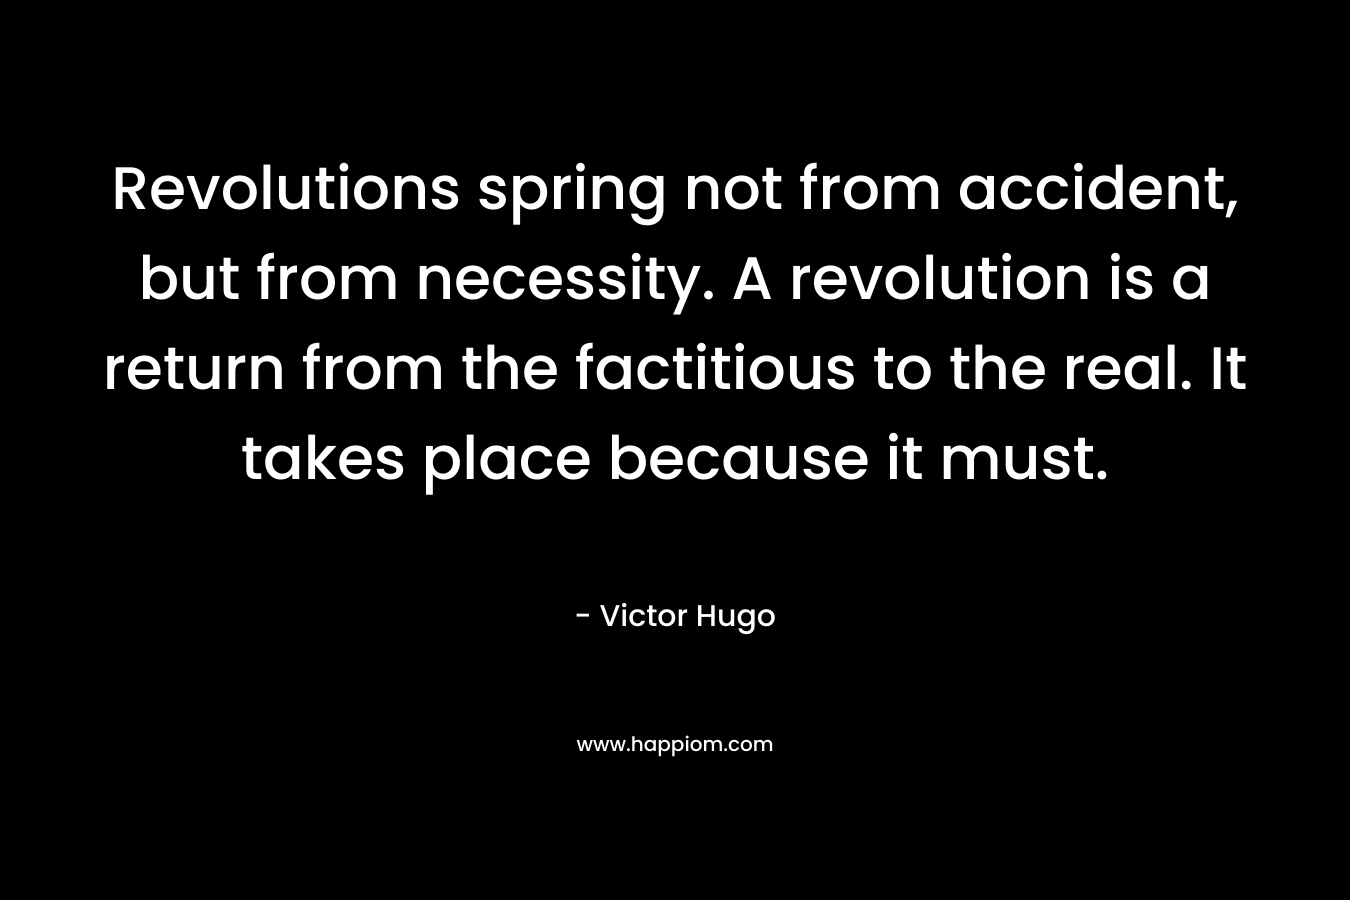 Revolutions spring not from accident, but from necessity. A revolution is a return from the factitious to the real. It takes place because it must. – Victor Hugo